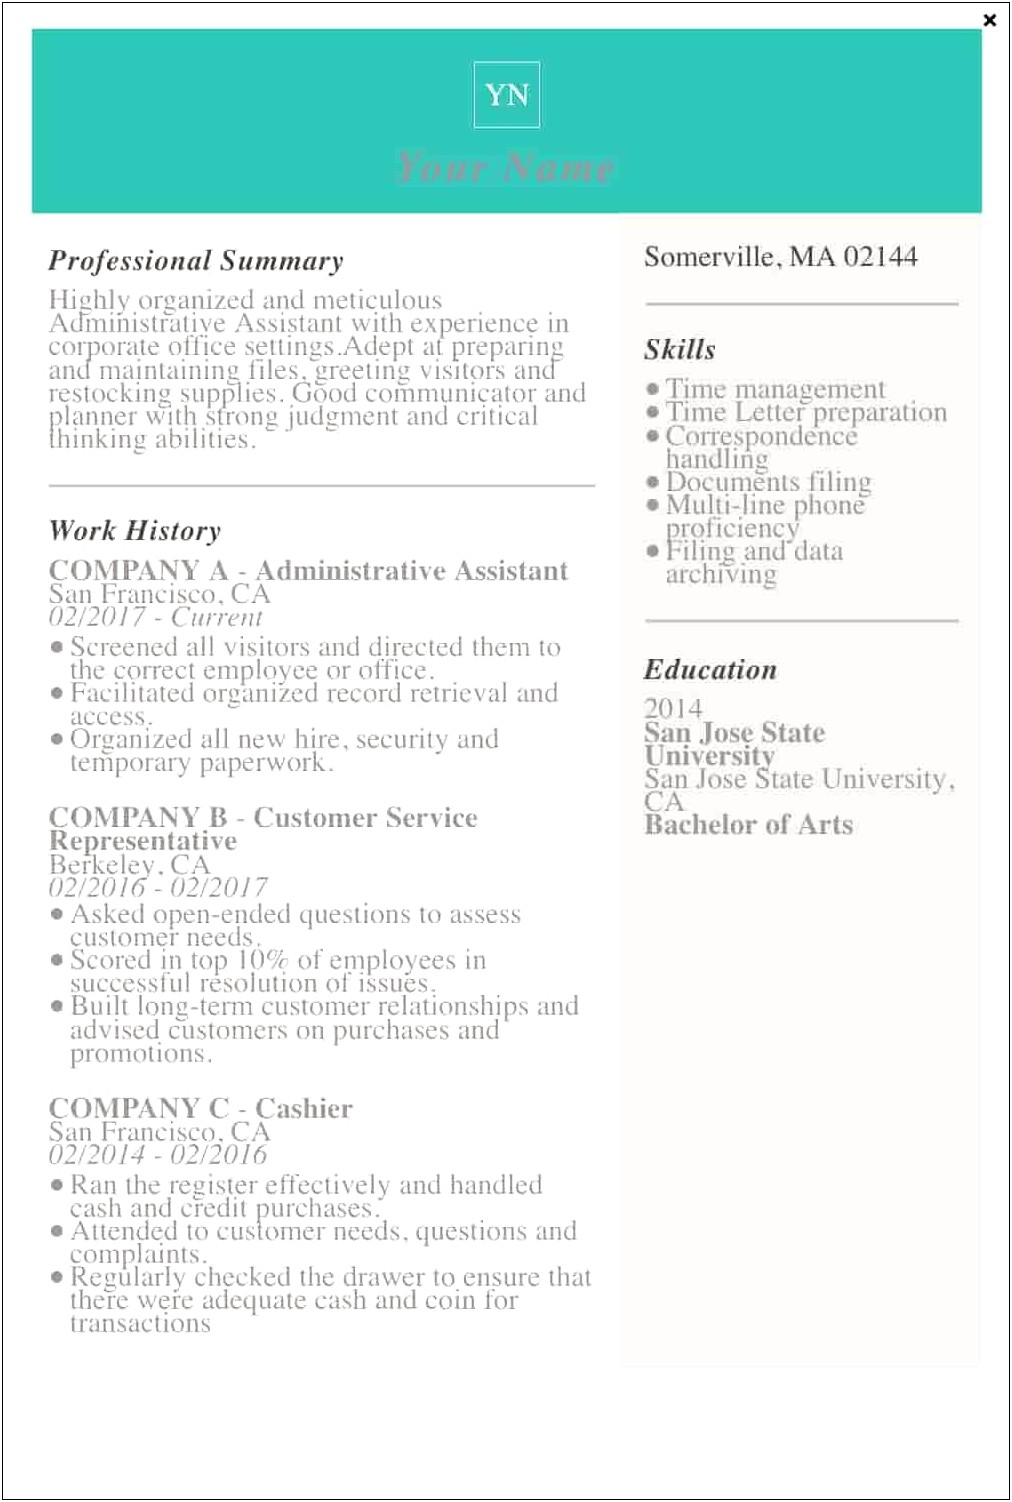 Sample Resume Summary For Professionally Mature Worker